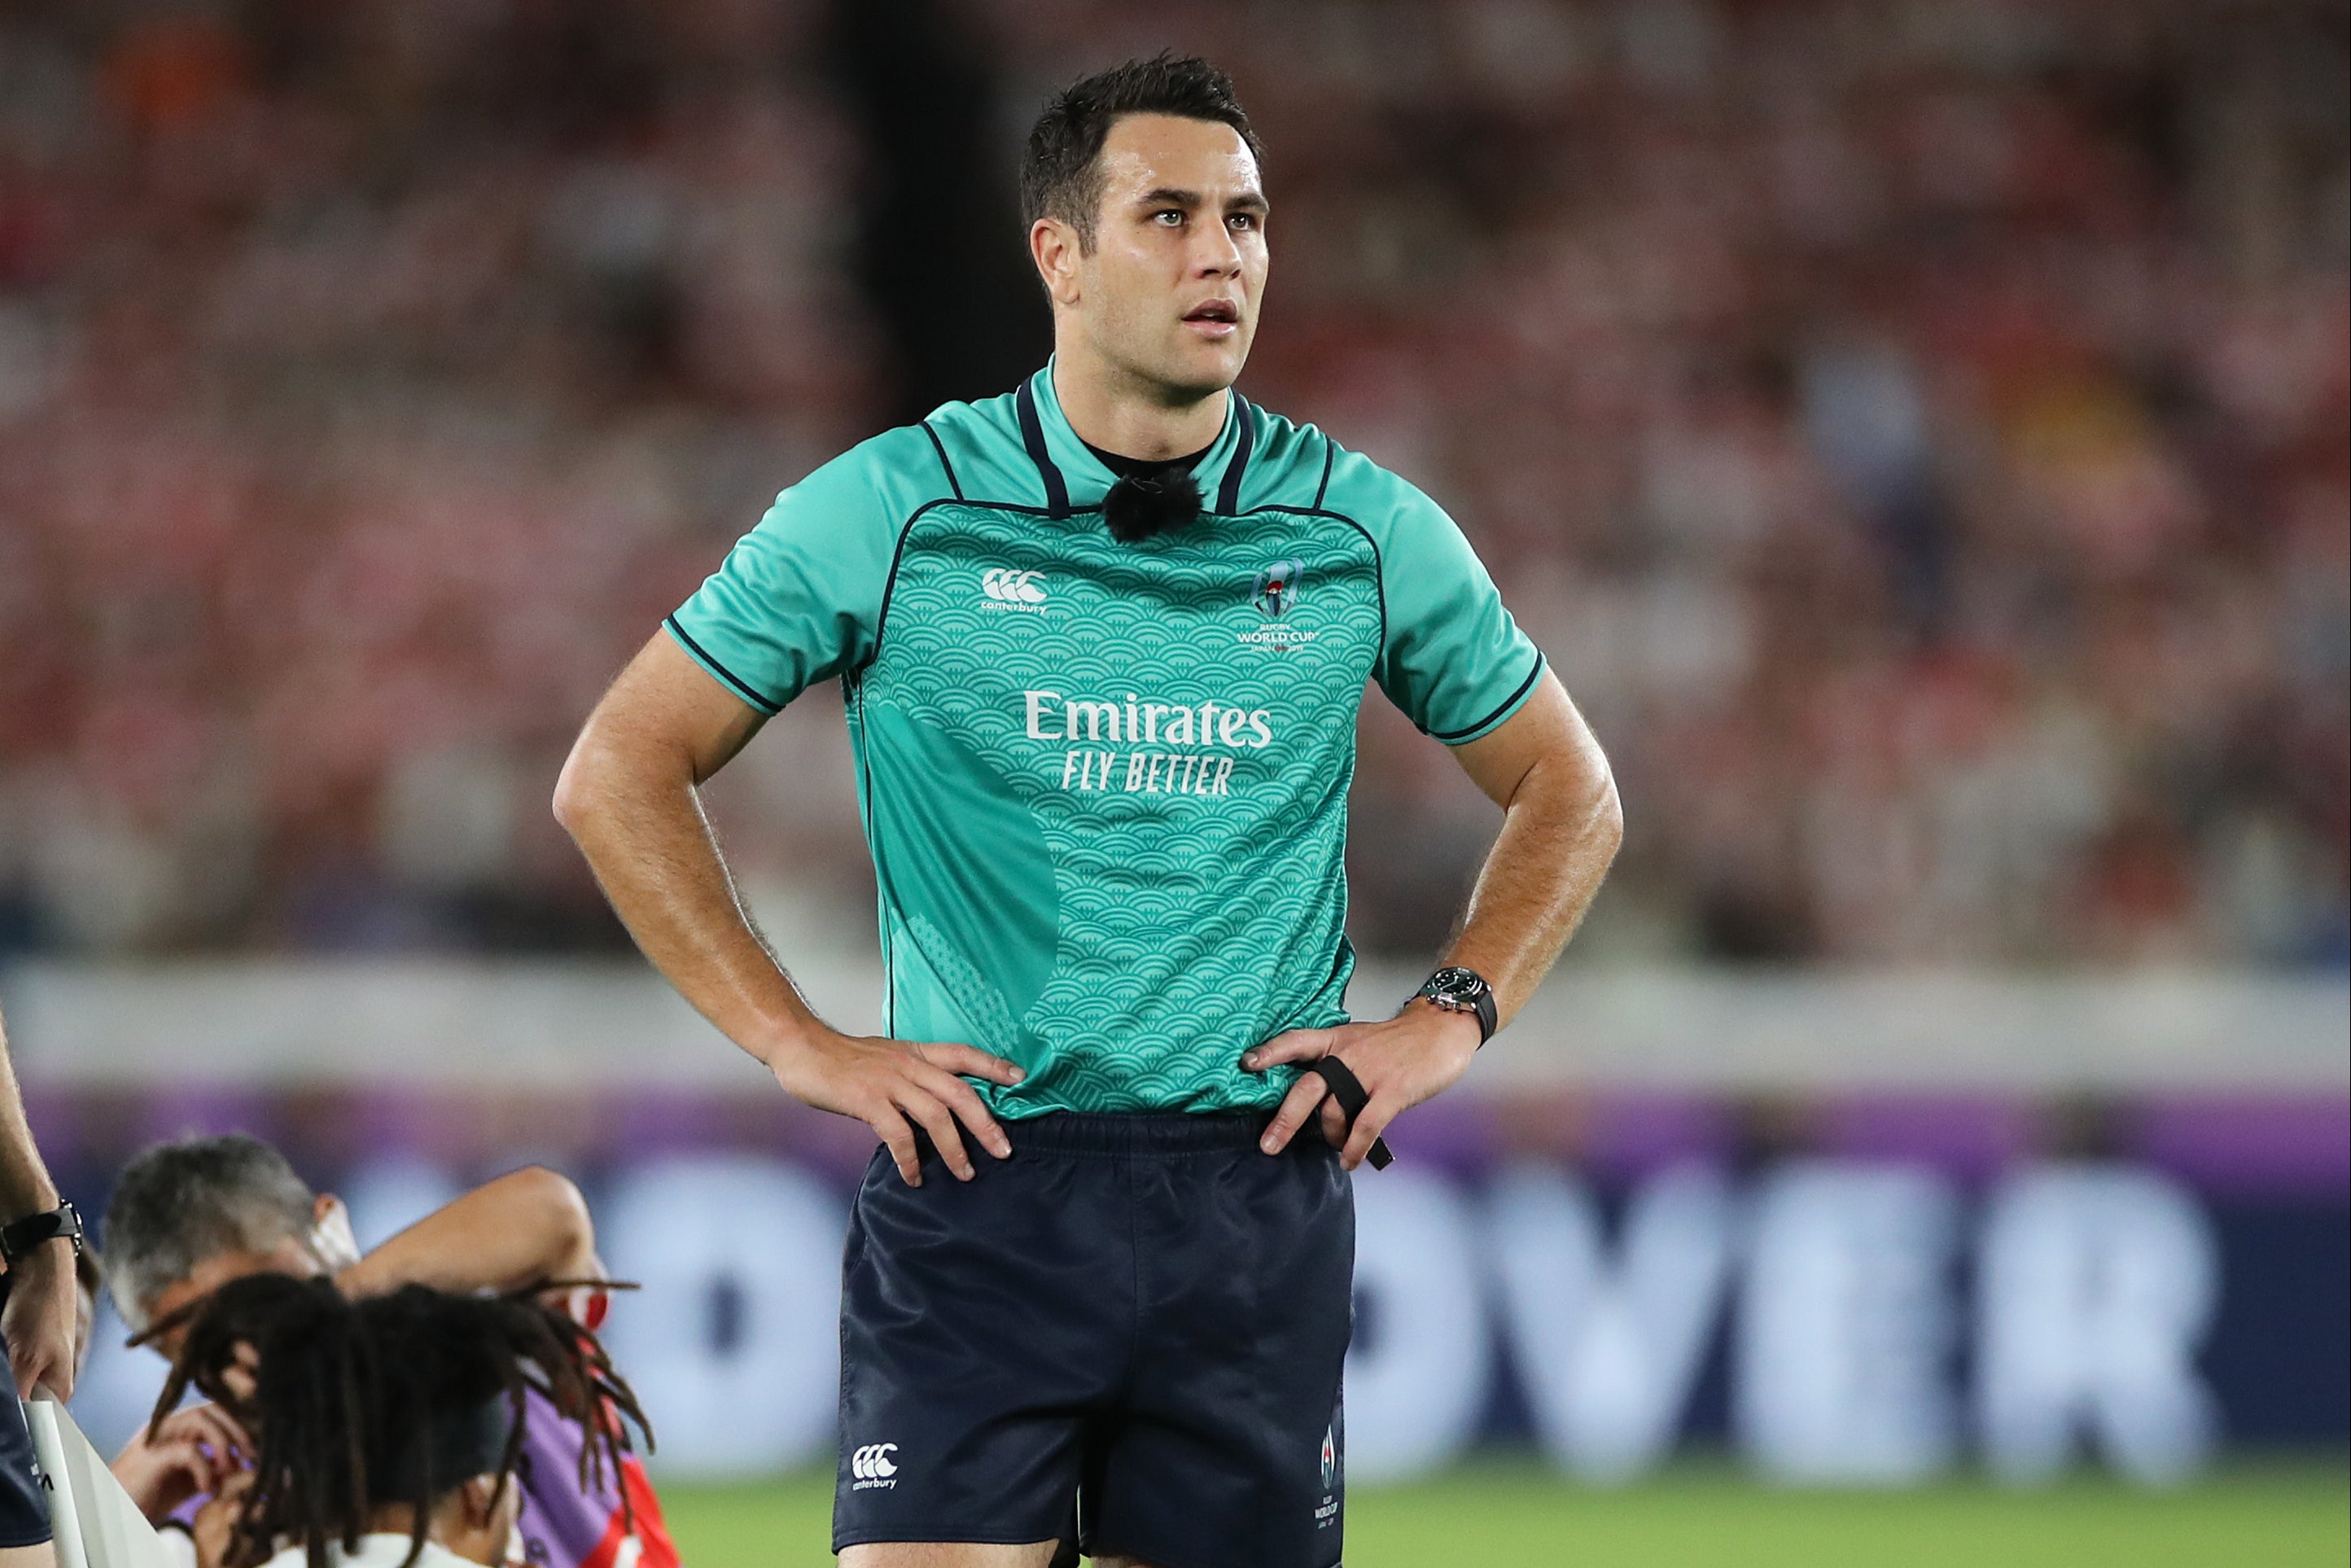 Ben O’Keeffe will officiate England v South Africa